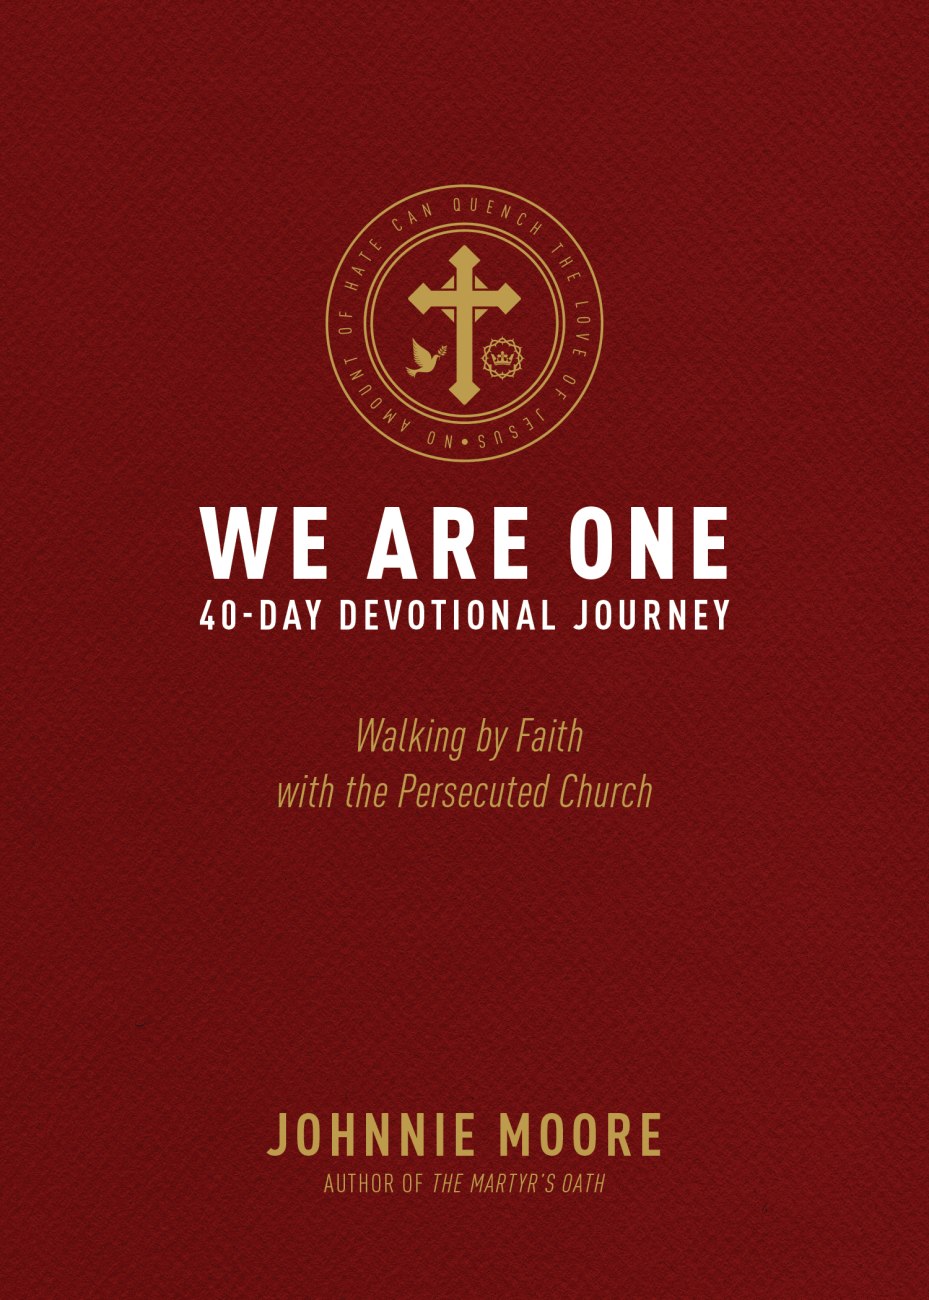 We Are One: Walking By Faith With the Persecuted Church (40 Day Devotional Journey) Hardback